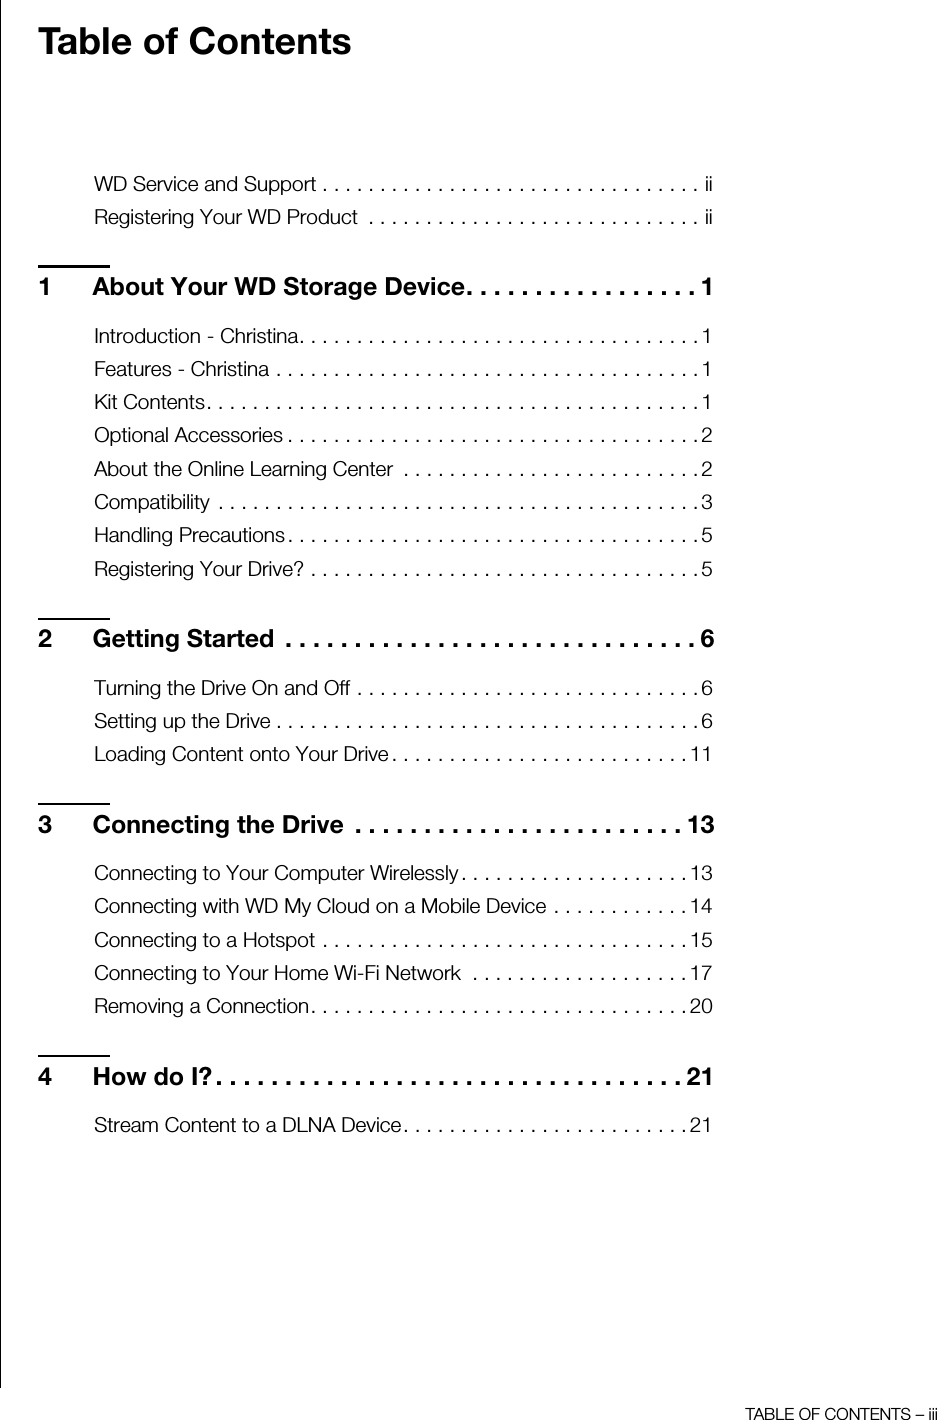 TABLE OF CONTENTS – iiiTable of ContentsWD Service and Support . . . . . . . . . . . . . . . . . . . . . . . . . . . . . . . . . iiRegistering Your WD Product  . . . . . . . . . . . . . . . . . . . . . . . . . . . . . ii1 About Your WD Storage Device. . . . . . . . . . . . . . . . . 1Introduction - Christina. . . . . . . . . . . . . . . . . . . . . . . . . . . . . . . . . . . 1Features - Christina . . . . . . . . . . . . . . . . . . . . . . . . . . . . . . . . . . . . . 1Kit Contents. . . . . . . . . . . . . . . . . . . . . . . . . . . . . . . . . . . . . . . . . . . 1Optional Accessories . . . . . . . . . . . . . . . . . . . . . . . . . . . . . . . . . . . . 2About the Online Learning Center  . . . . . . . . . . . . . . . . . . . . . . . . . . 2Compatibility  . . . . . . . . . . . . . . . . . . . . . . . . . . . . . . . . . . . . . . . . . . 3Handling Precautions . . . . . . . . . . . . . . . . . . . . . . . . . . . . . . . . . . . . 5Registering Your Drive? . . . . . . . . . . . . . . . . . . . . . . . . . . . . . . . . . . 52 Getting Started  . . . . . . . . . . . . . . . . . . . . . . . . . . . . . . 6Turning the Drive On and Off . . . . . . . . . . . . . . . . . . . . . . . . . . . . . . 6Setting up the Drive . . . . . . . . . . . . . . . . . . . . . . . . . . . . . . . . . . . . . 6Loading Content onto Your Drive . . . . . . . . . . . . . . . . . . . . . . . . . . 113 Connecting the Drive  . . . . . . . . . . . . . . . . . . . . . . . . 13Connecting to Your Computer Wirelessly . . . . . . . . . . . . . . . . . . . . 13Connecting with WD My Cloud on a Mobile Device . . . . . . . . . . . . 14Connecting to a Hotspot . . . . . . . . . . . . . . . . . . . . . . . . . . . . . . . . 15Connecting to Your Home Wi-Fi Network  . . . . . . . . . . . . . . . . . . . 17Removing a Connection. . . . . . . . . . . . . . . . . . . . . . . . . . . . . . . . . 204 How do I? . . . . . . . . . . . . . . . . . . . . . . . . . . . . . . . . . . 21Stream Content to a DLNA Device. . . . . . . . . . . . . . . . . . . . . . . . . 21